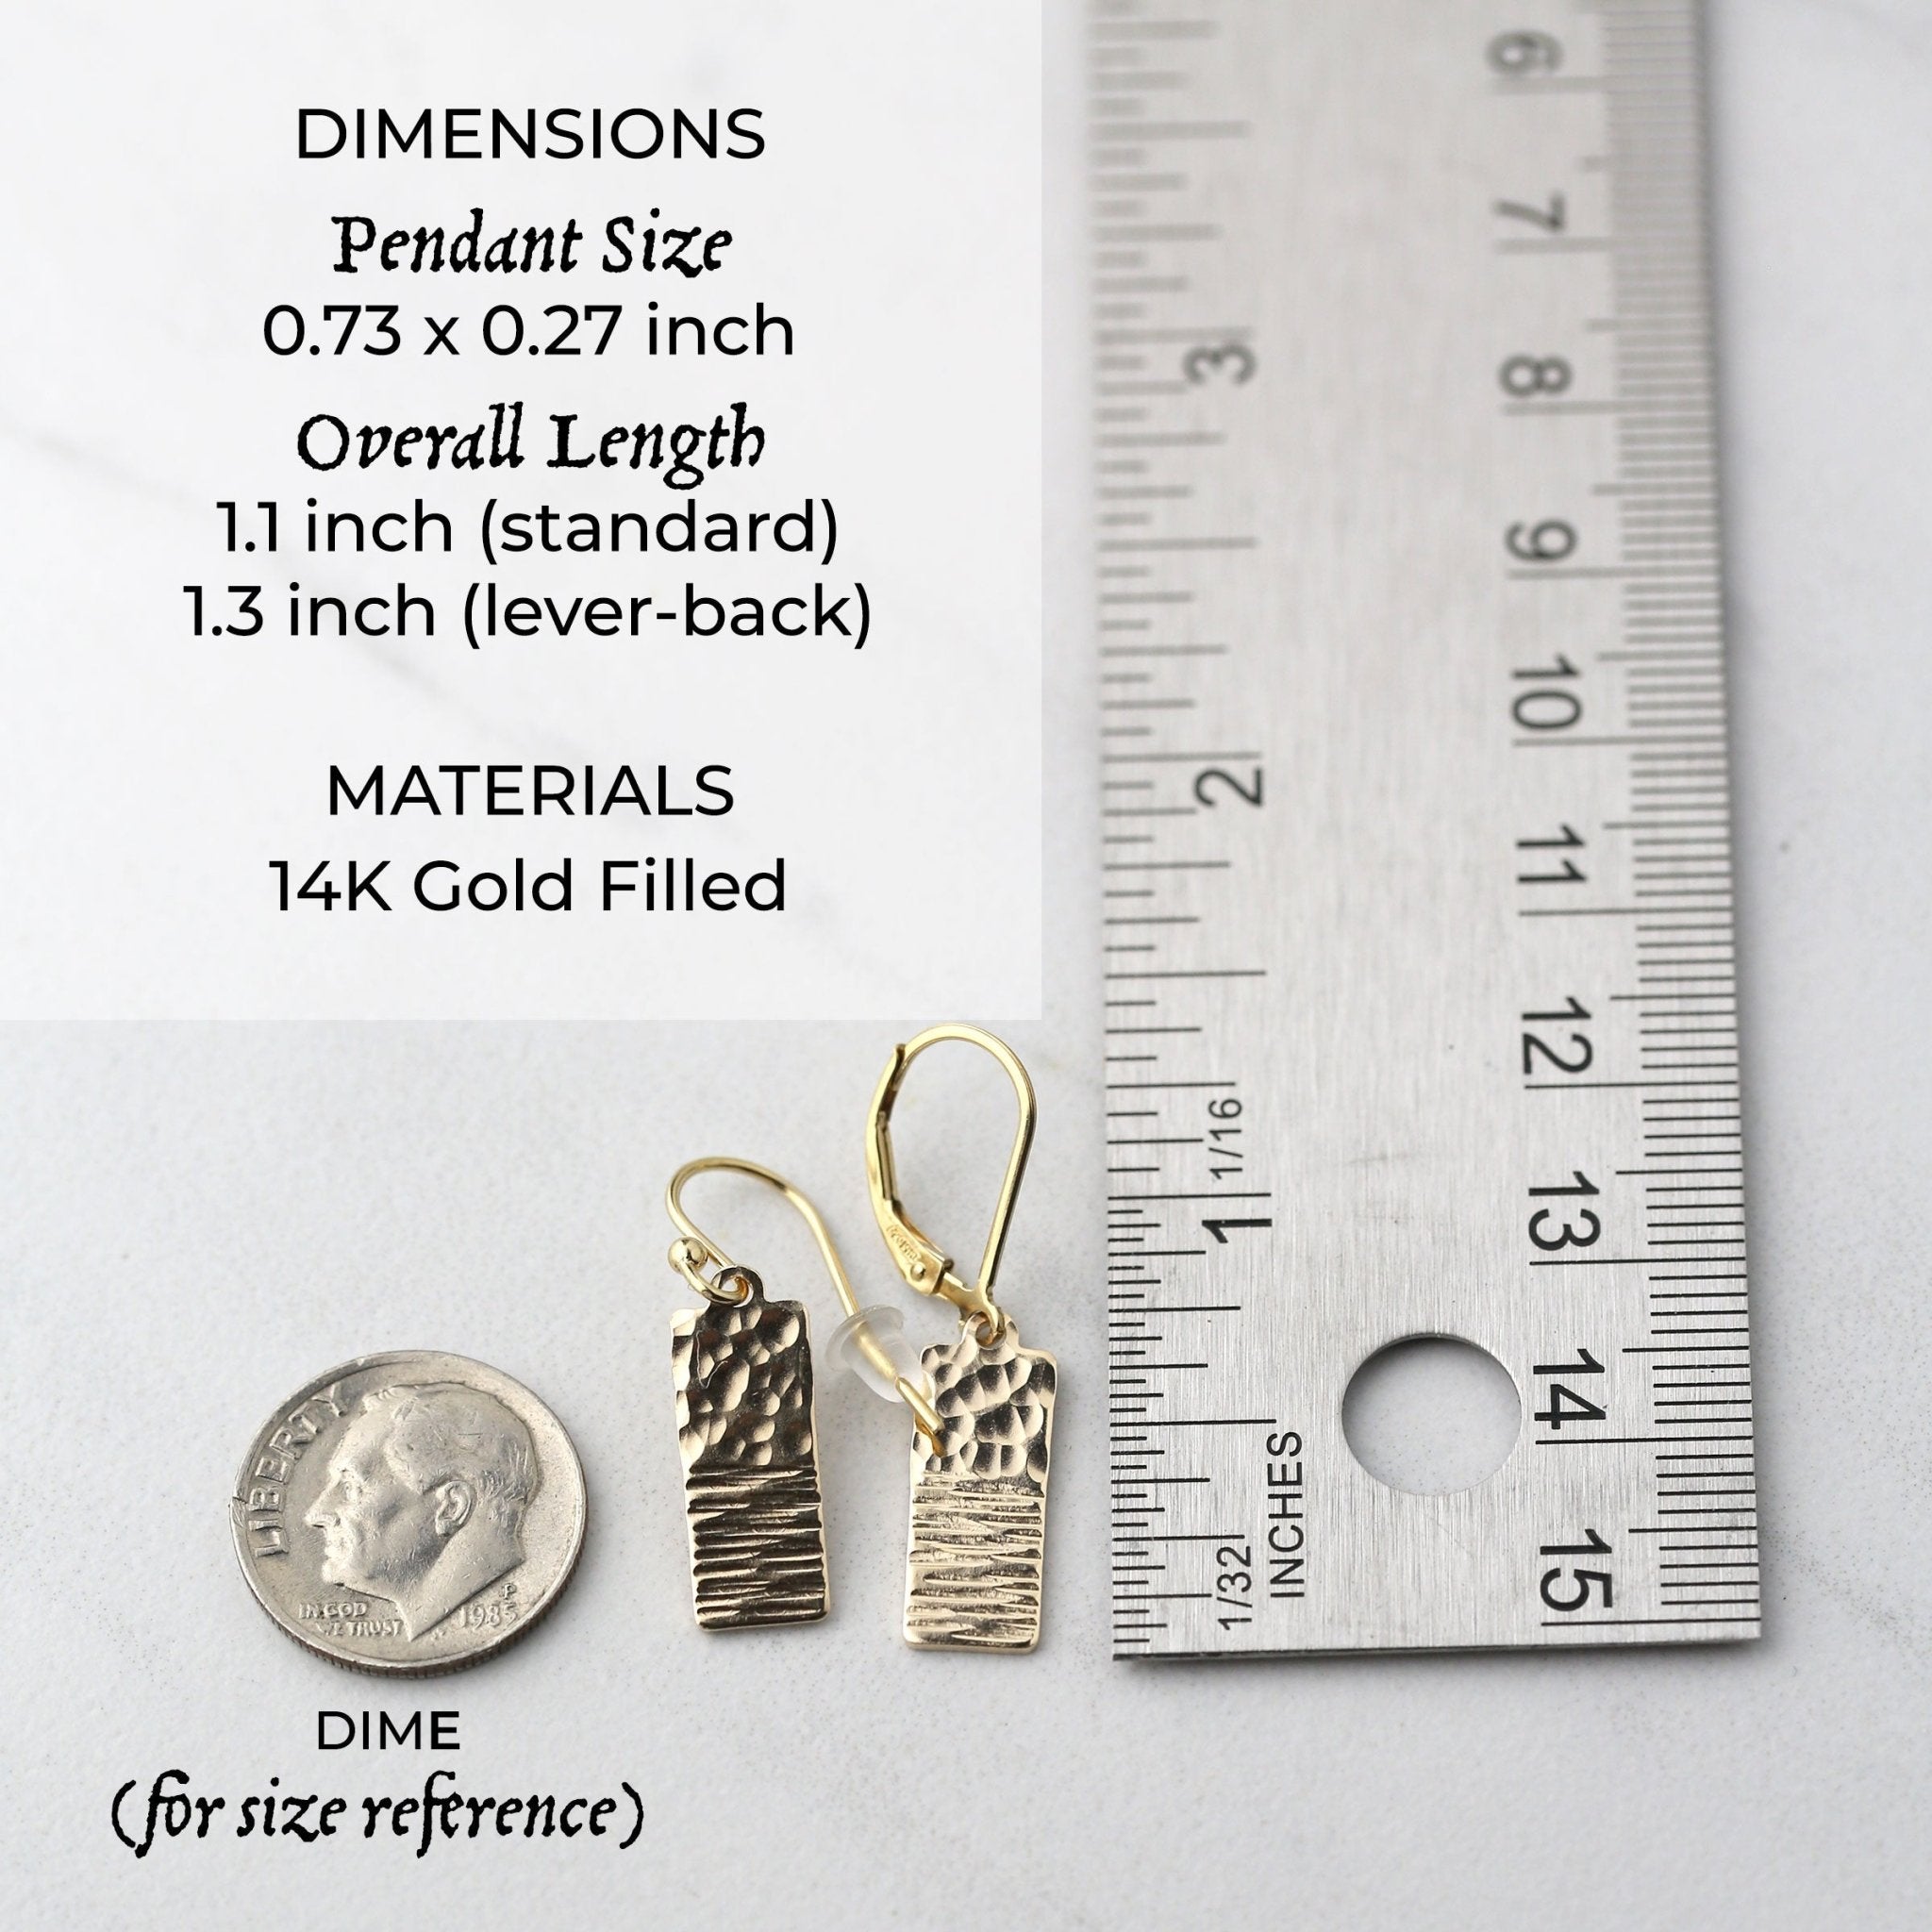 Gold Duo Texture Tag Earrings handmade by Burnish